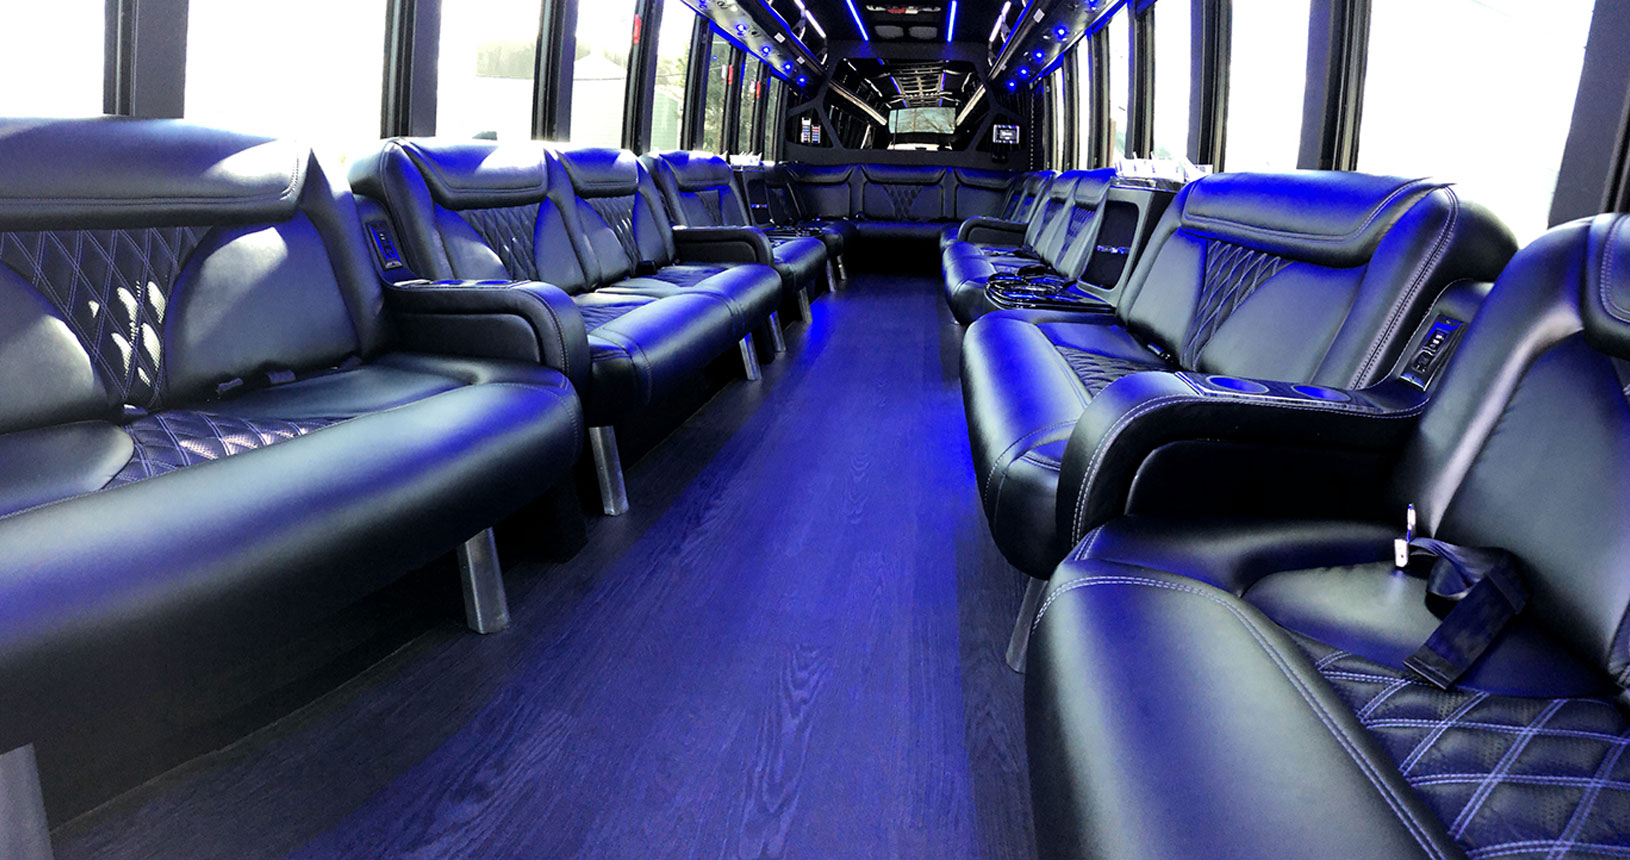 Luxurious Party Bus Limo Rental Service in Boston